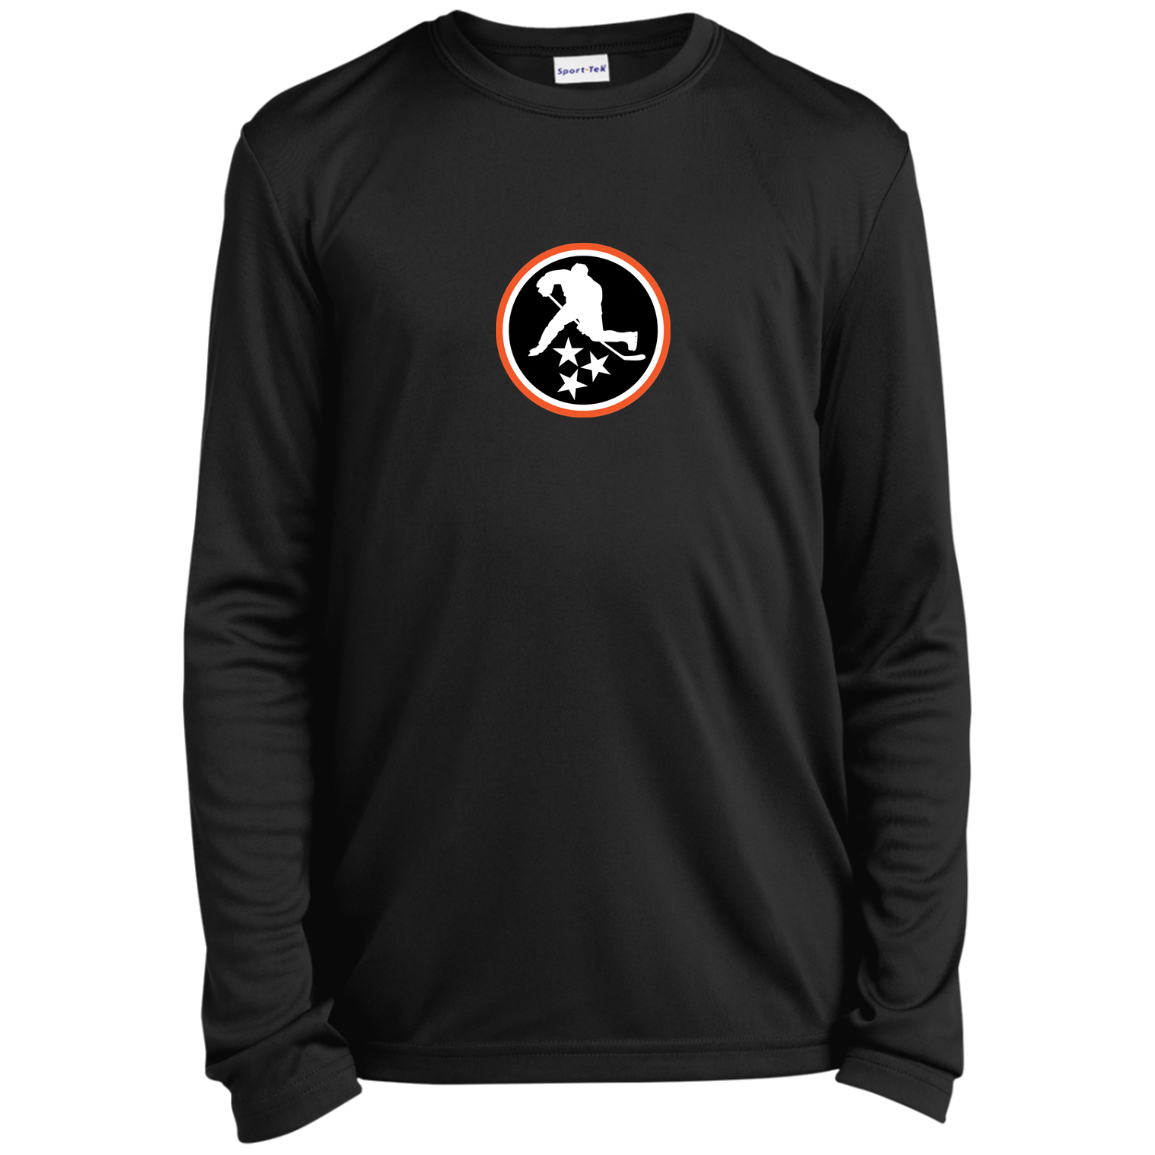 YOUTH KNOXVILLE PERFORMANCE LONG SLEEVE